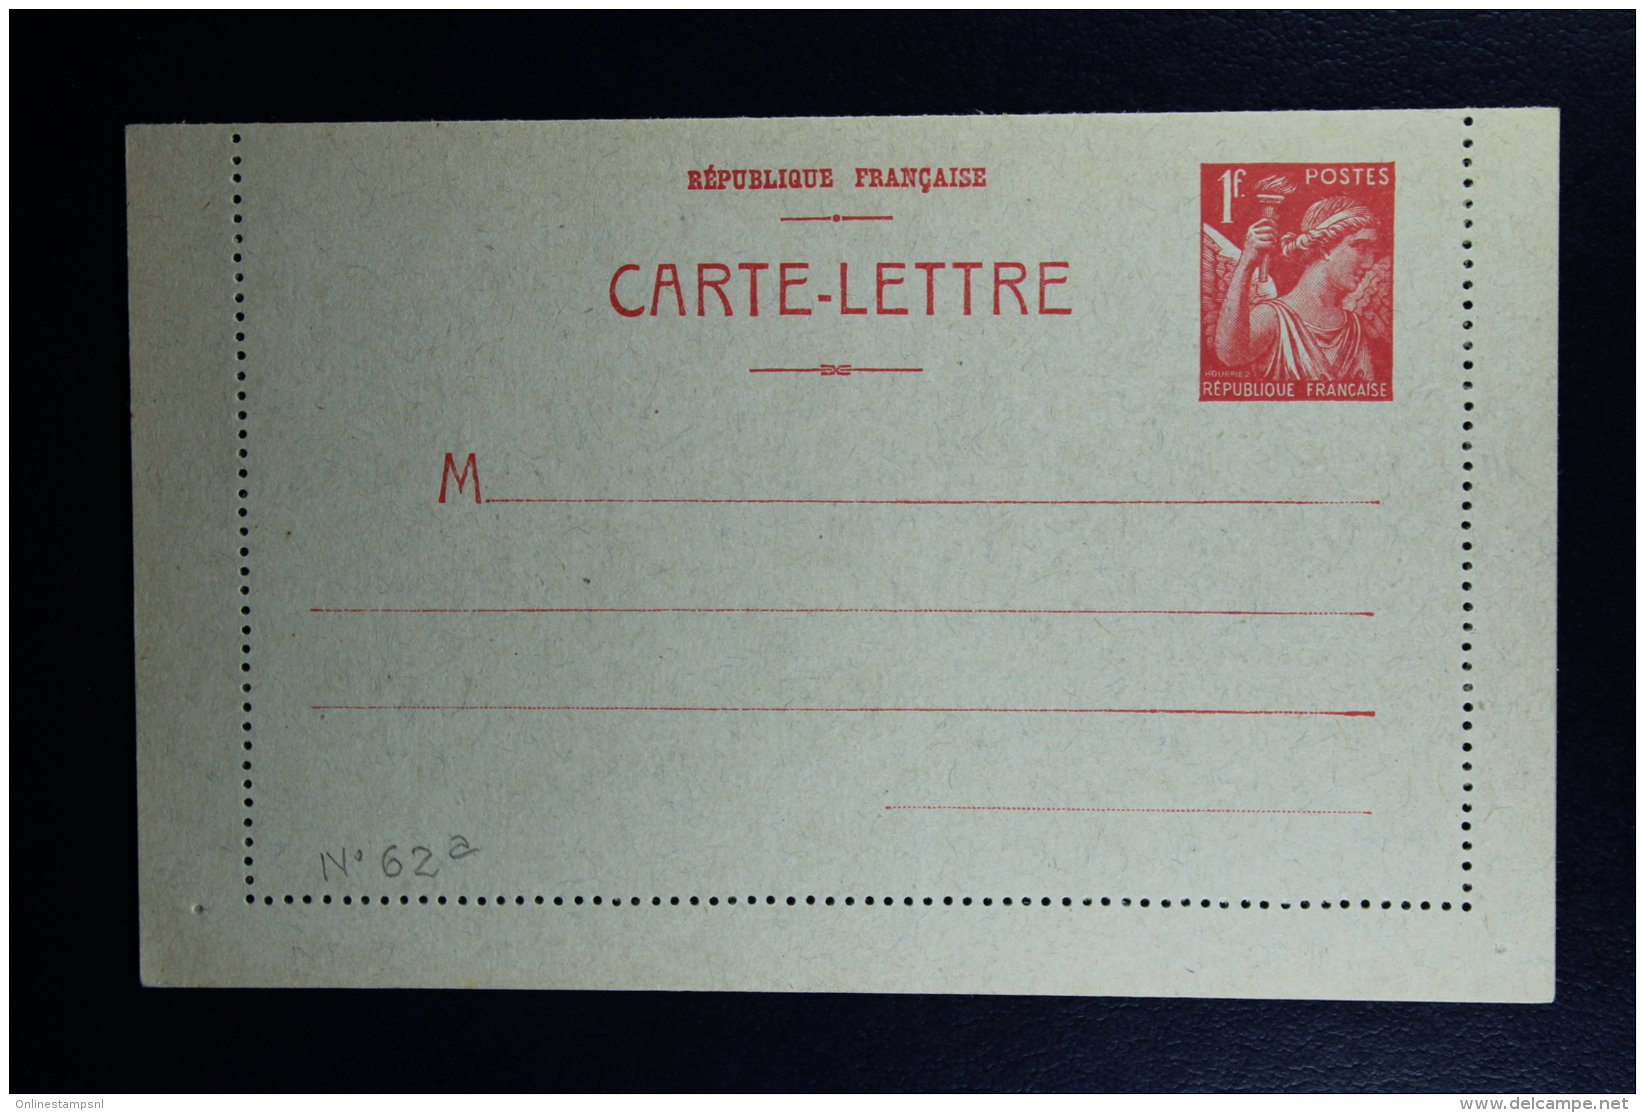 France: Carte-Lettre  Iris  1F  Type B1  Not Used - Cartes-lettres